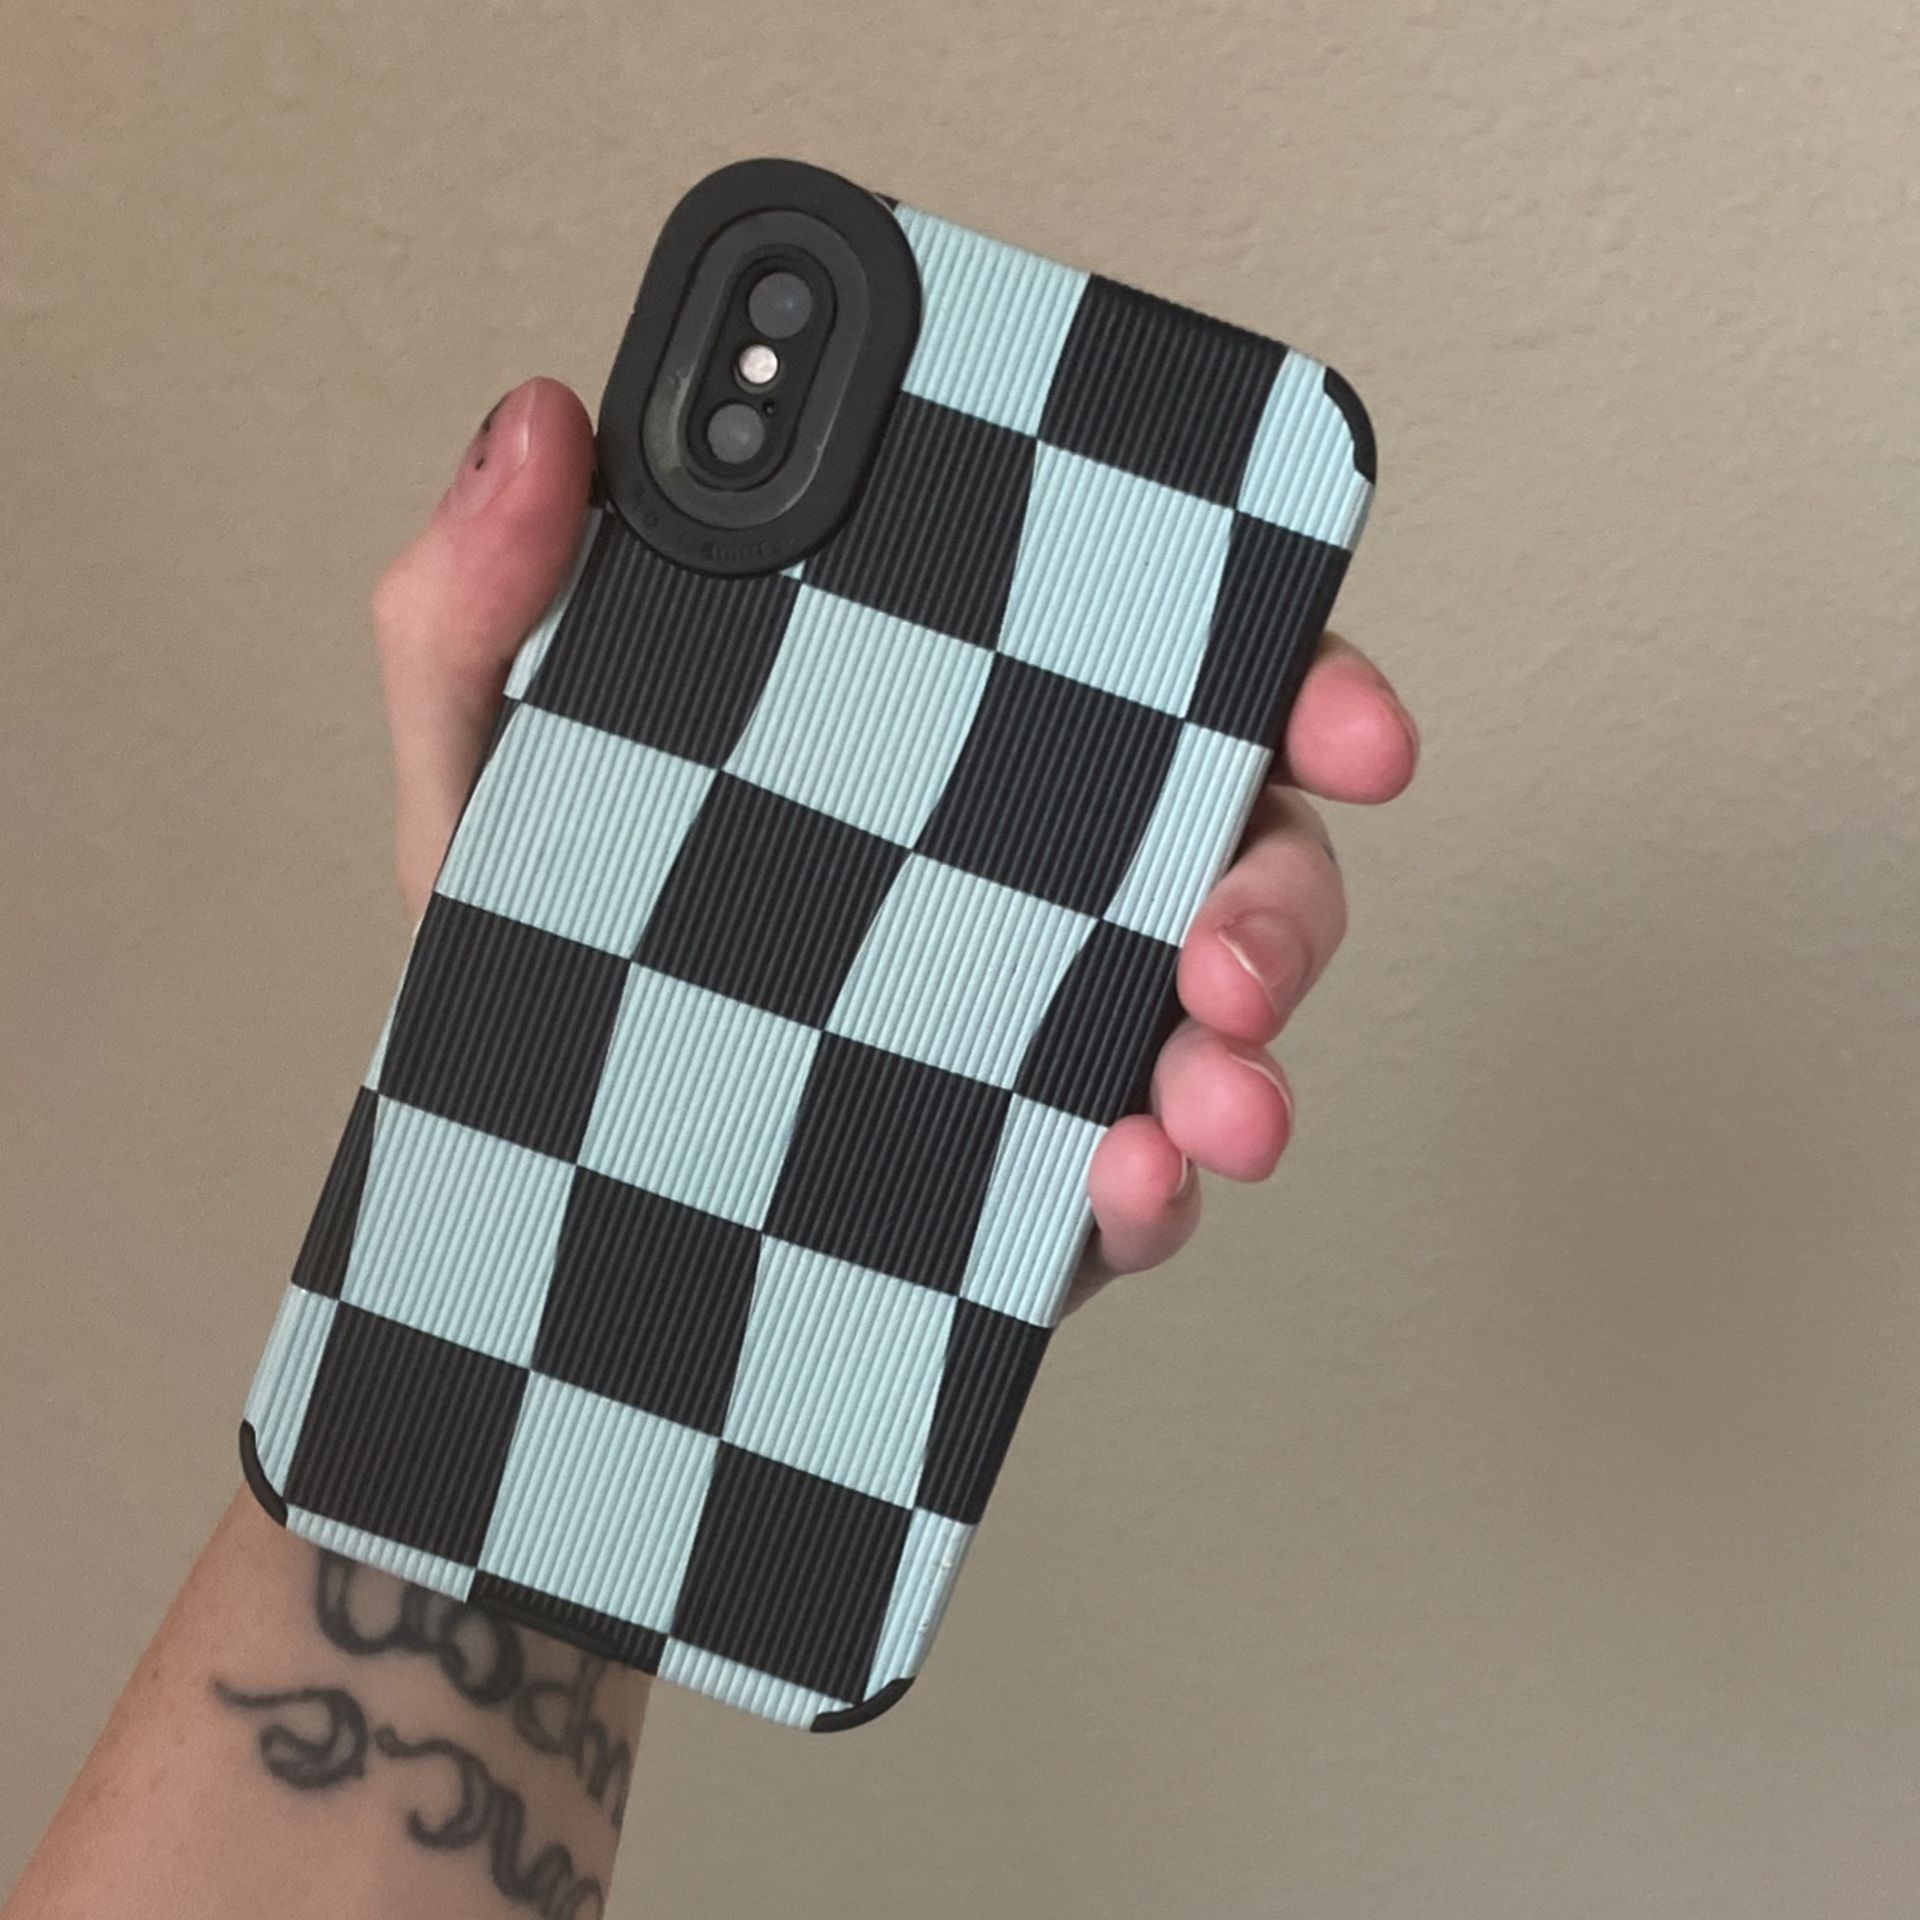 IPhone X (case Included)